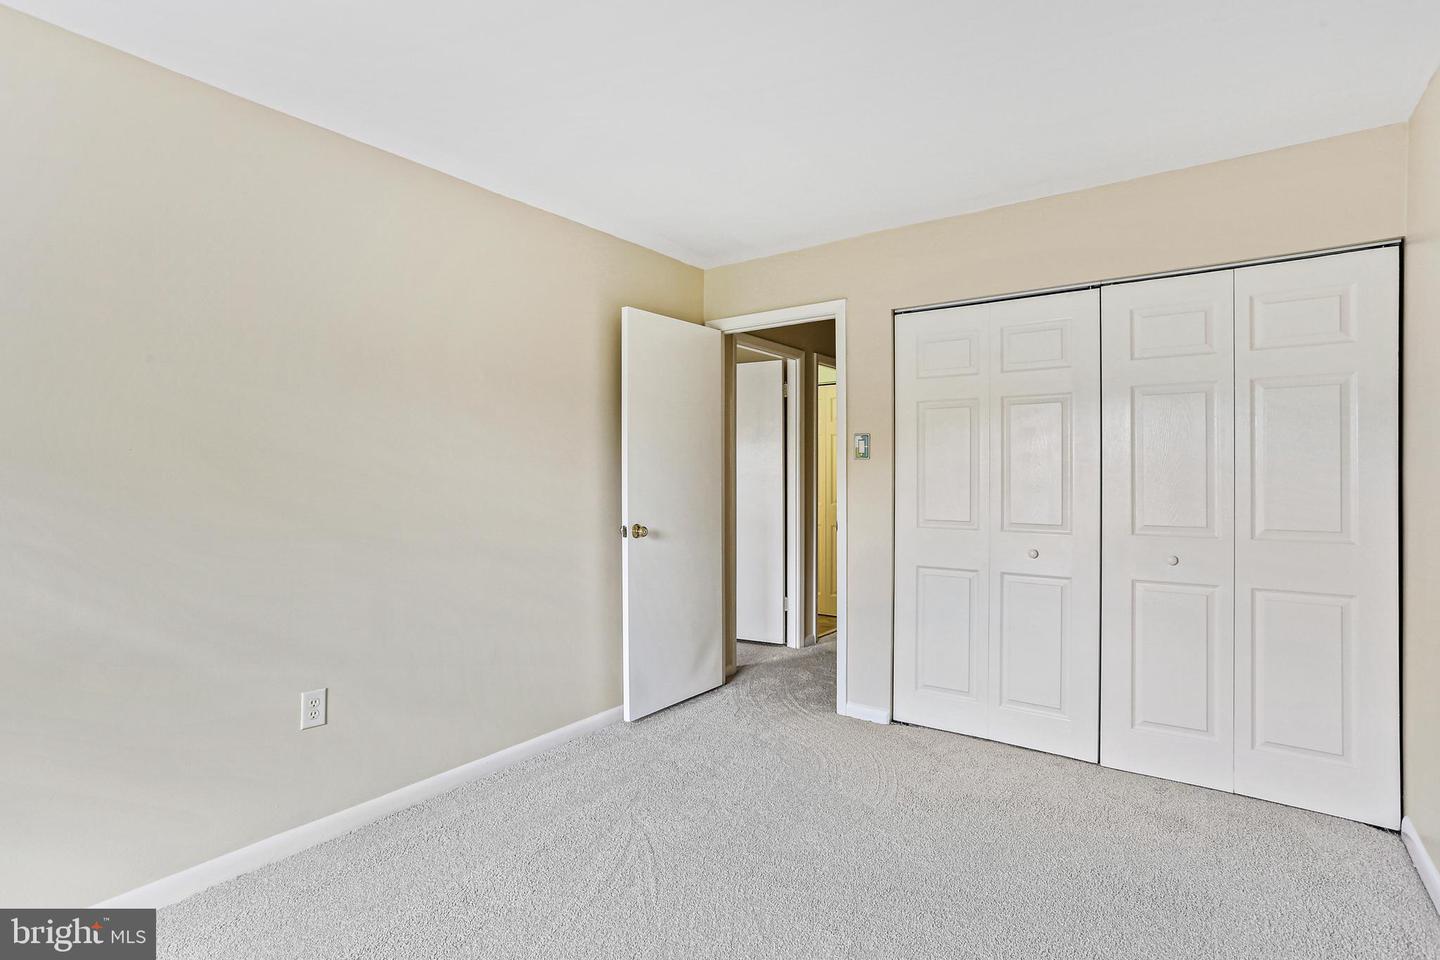 Photo 15 of 23 of 9220 Bridle Path Ln #L townhome